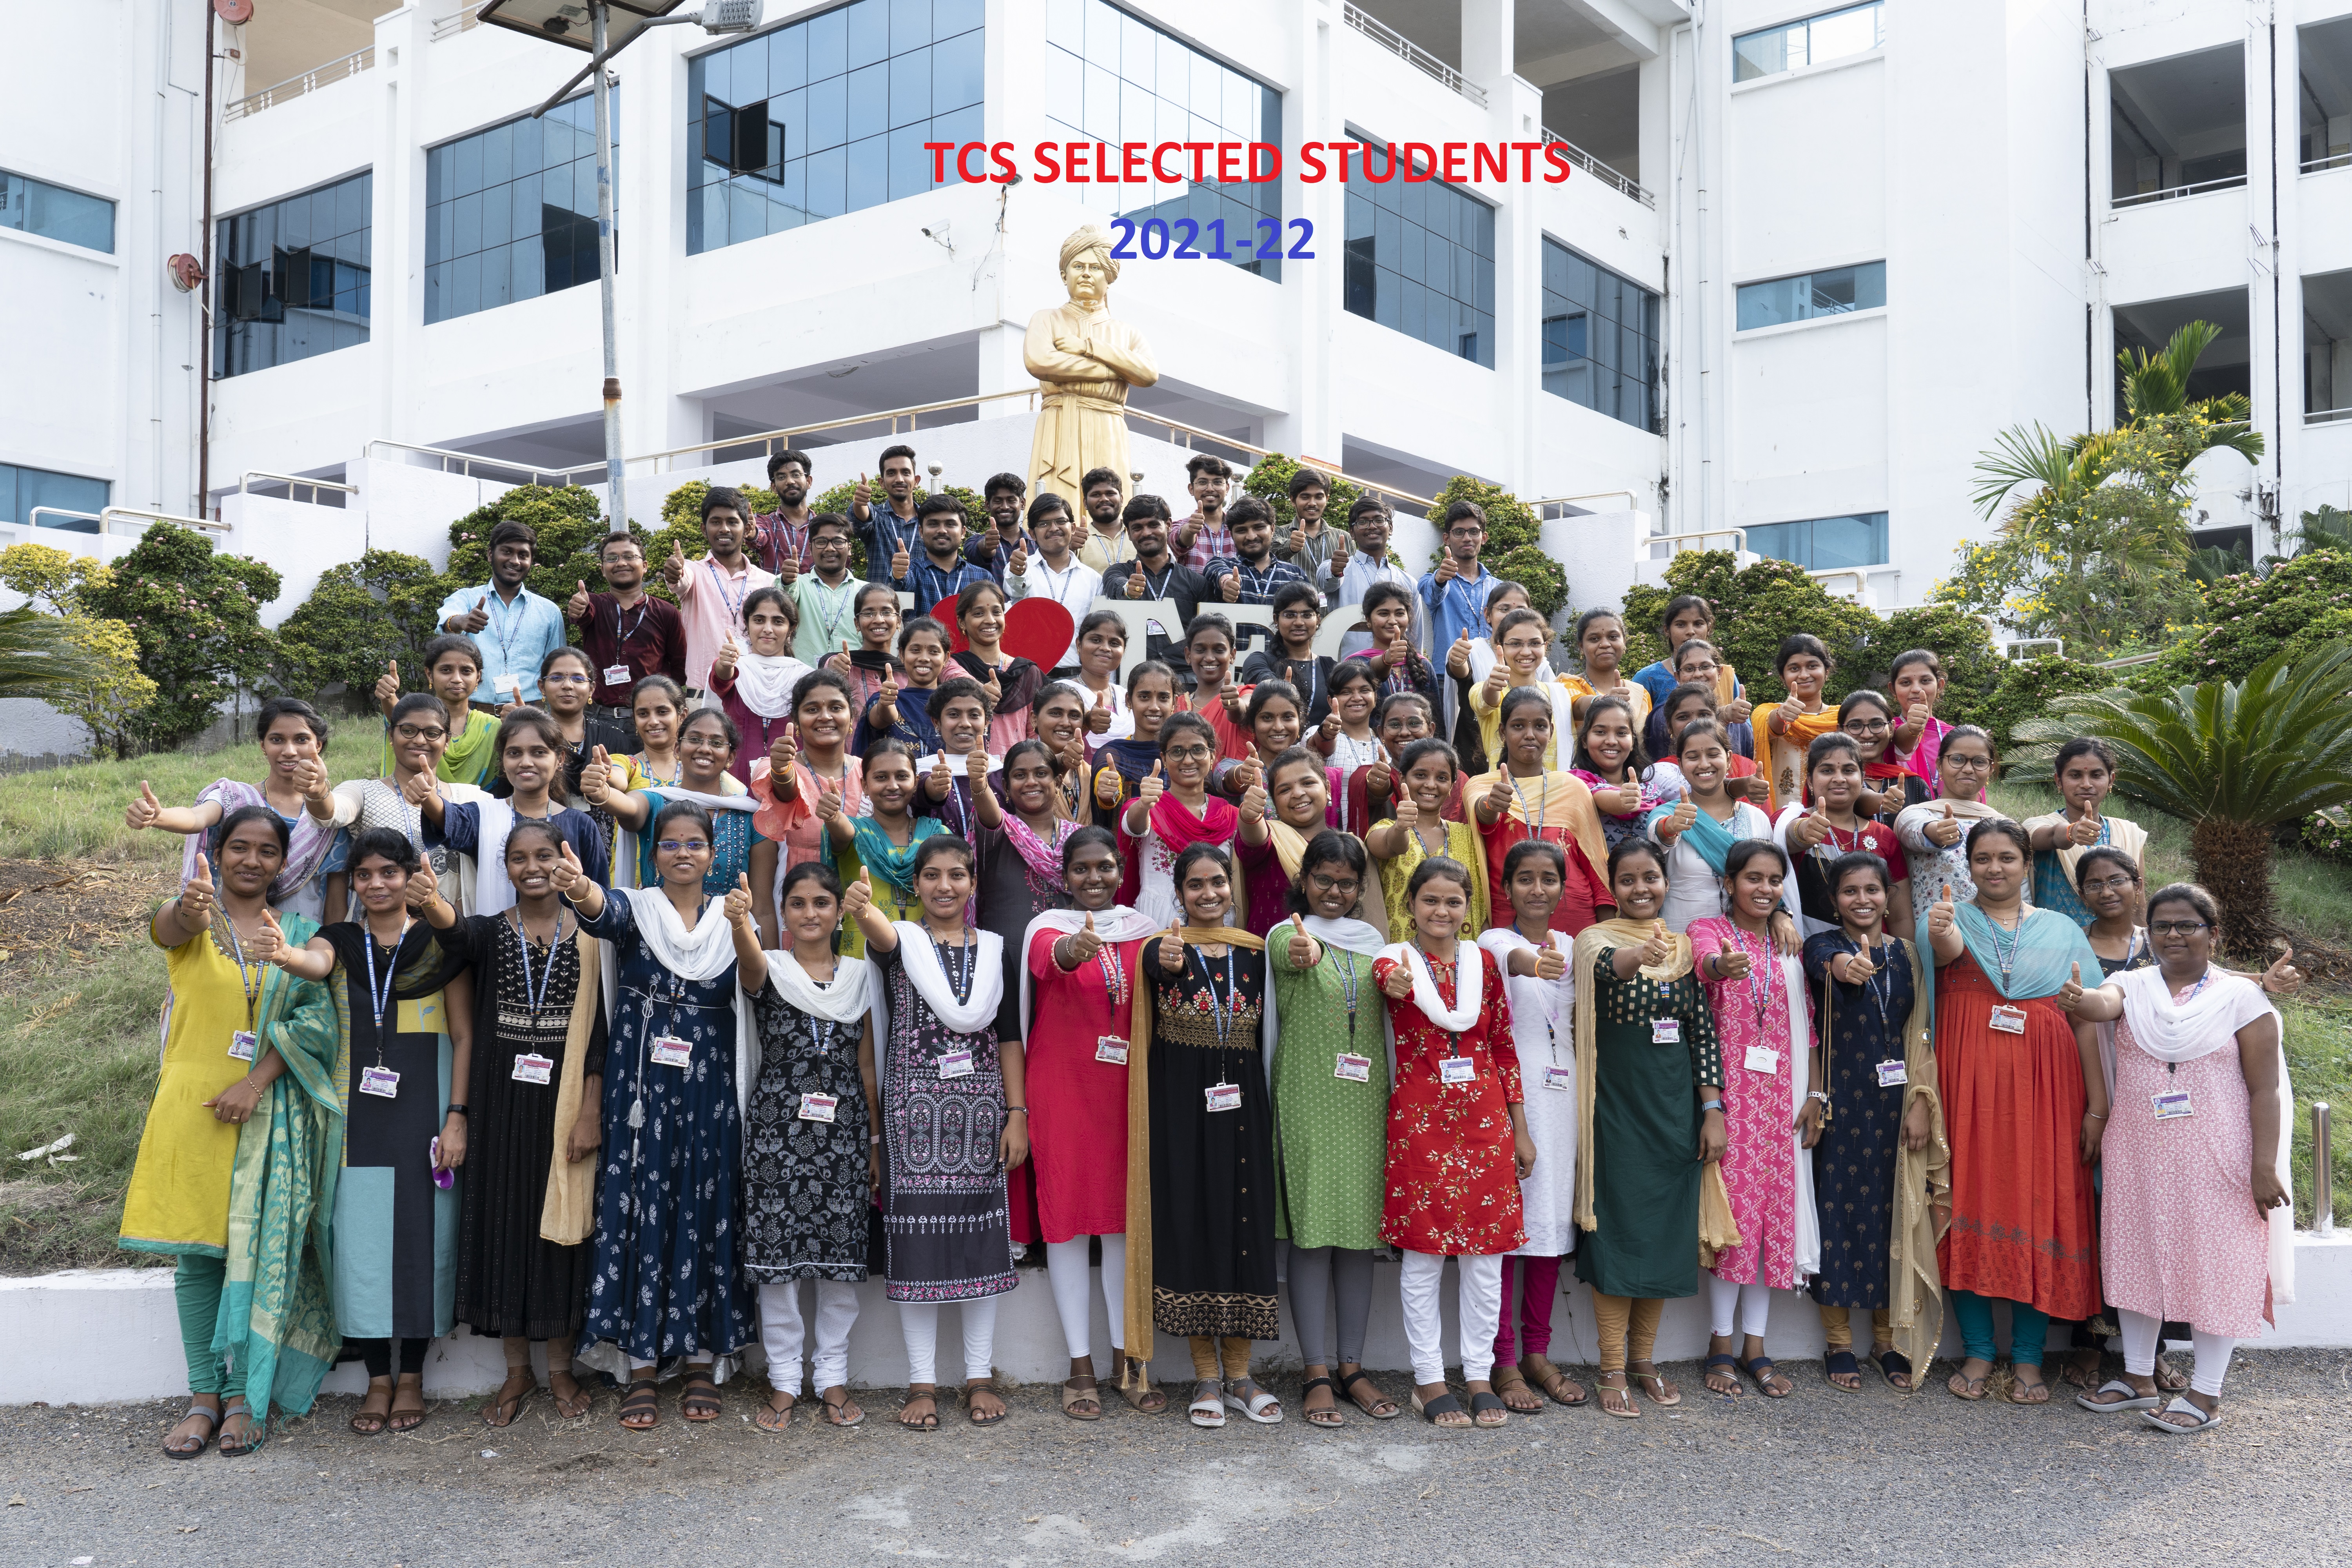 2021-22 TCS SELECTED STUDENTS 